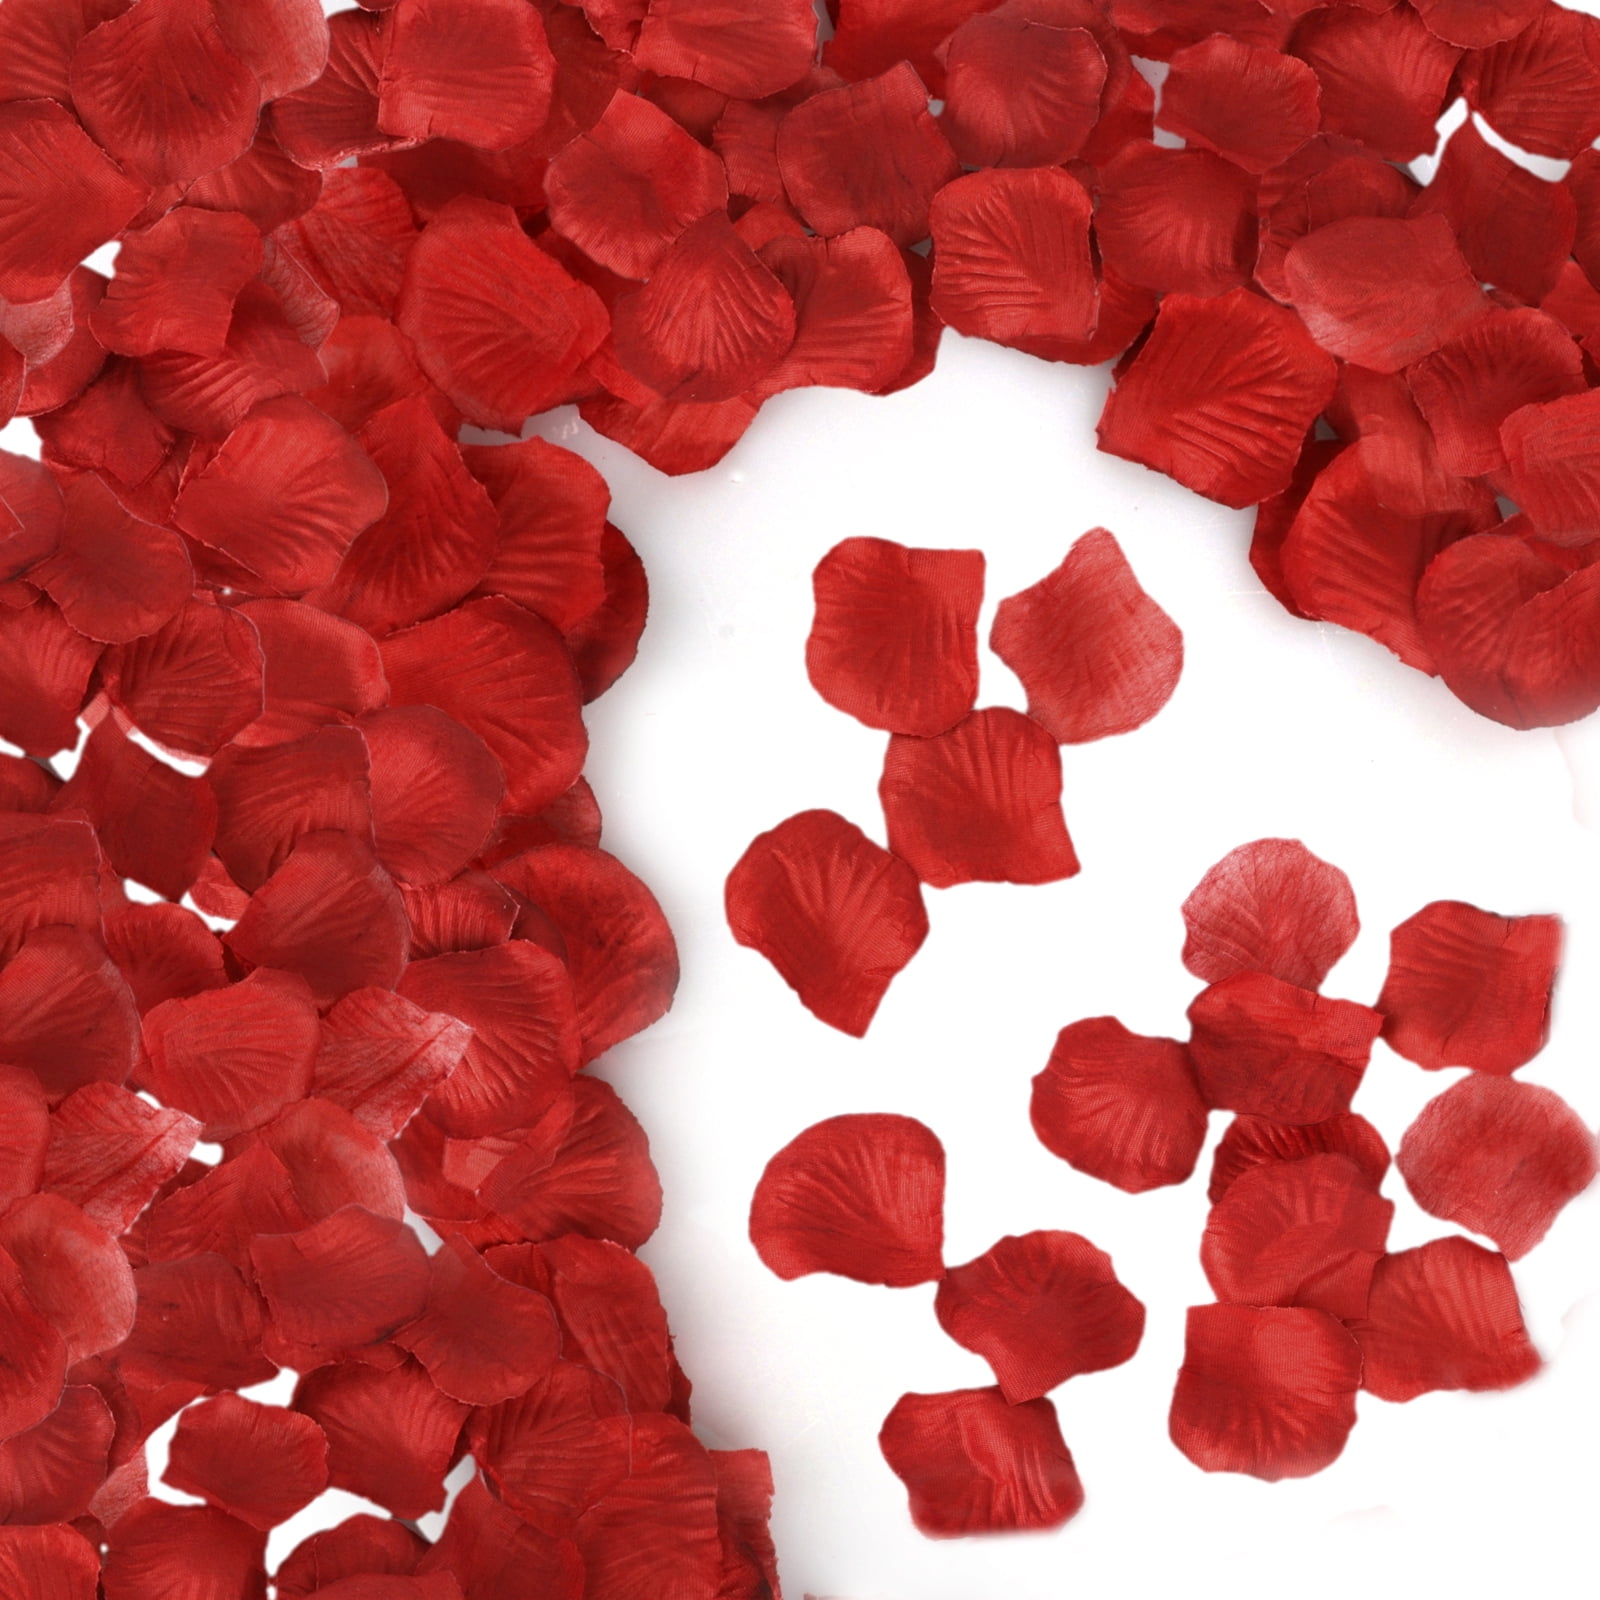 TSV Rose Petals, 1000pcs Artificial Fake Roses Flower Petals for Romantic  Night, Valentine's Day, Weddings Table Home Decoration(Red, Blue) 